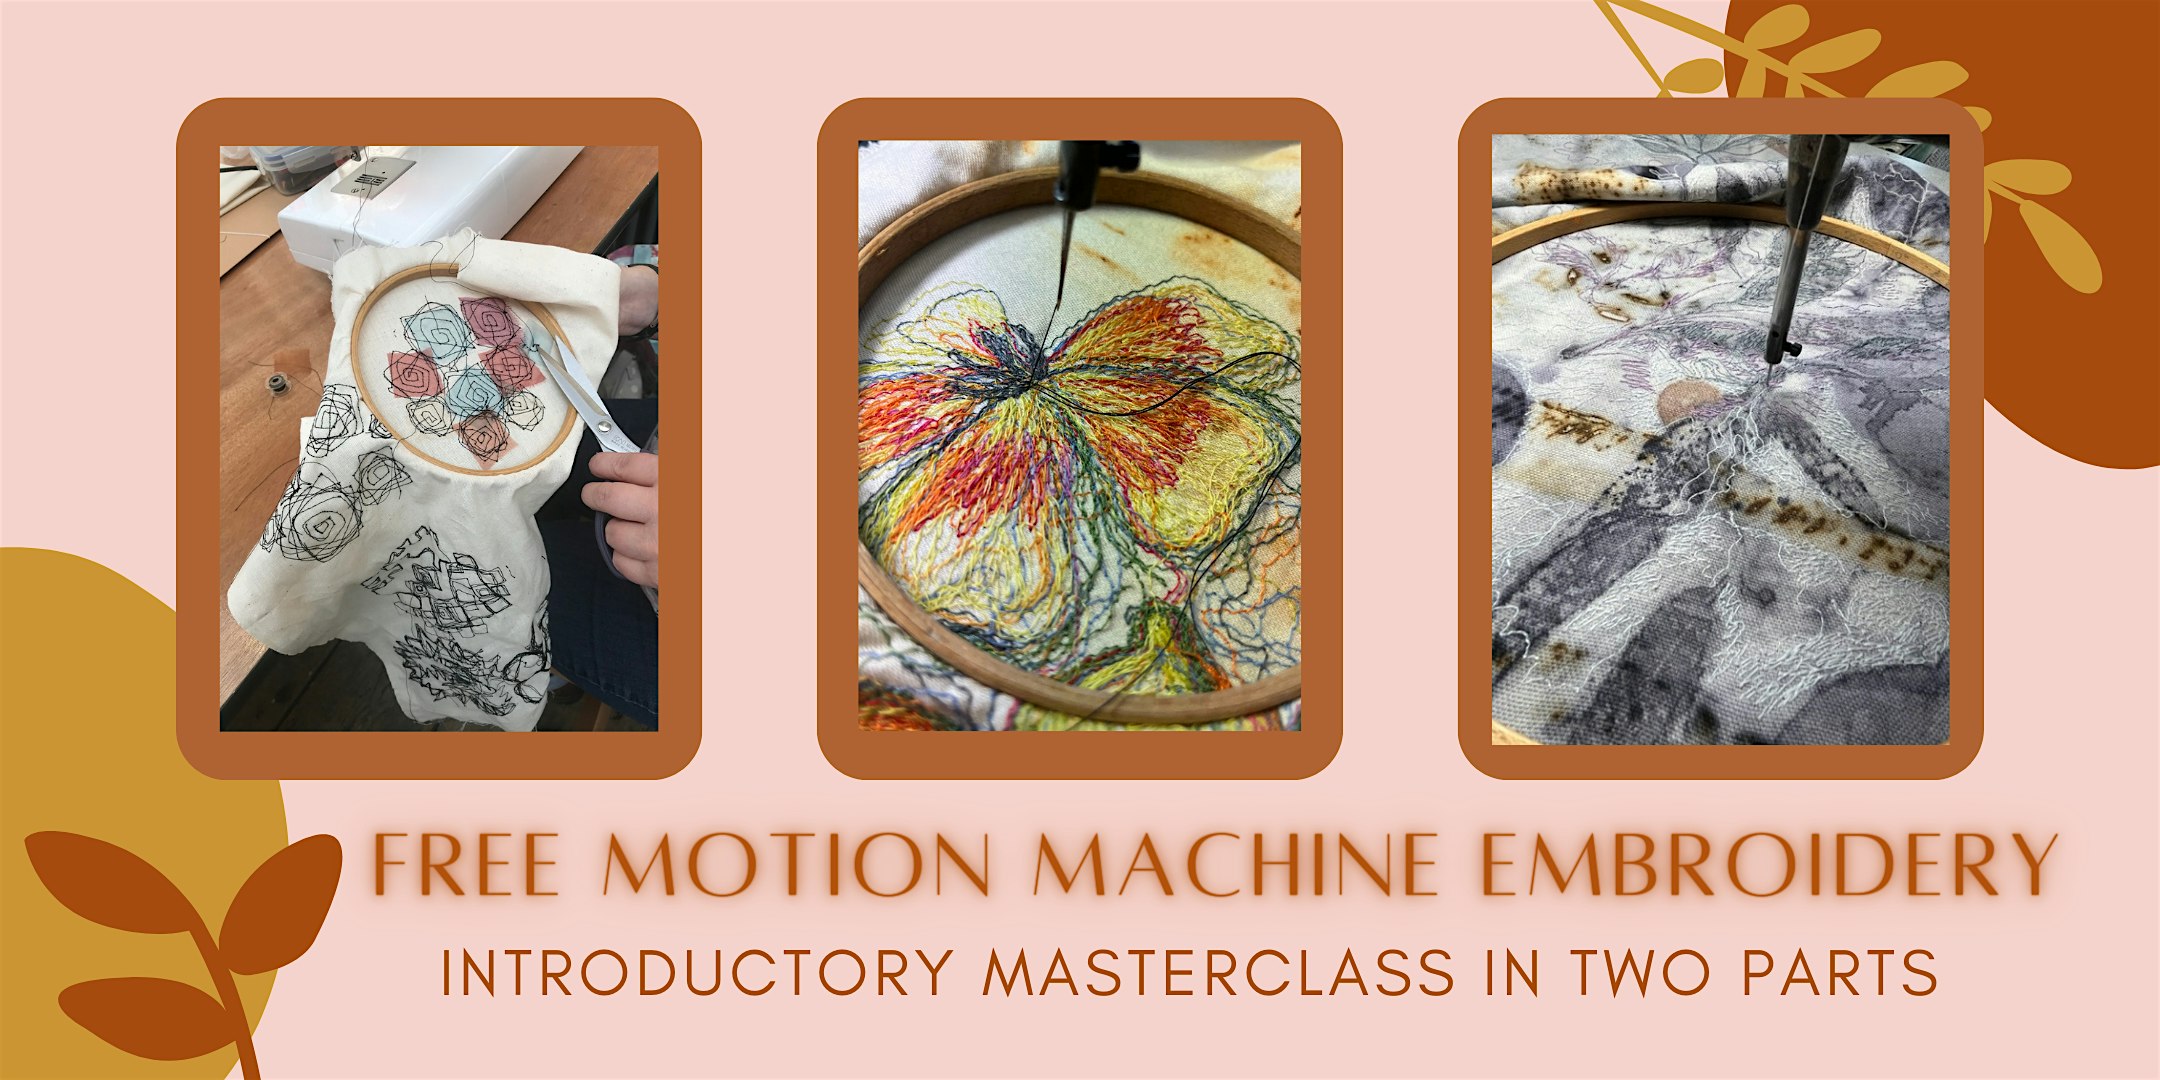 FREE MOTION MACHINE EMBROIDERY - Introductory Masterclass in Two Parts